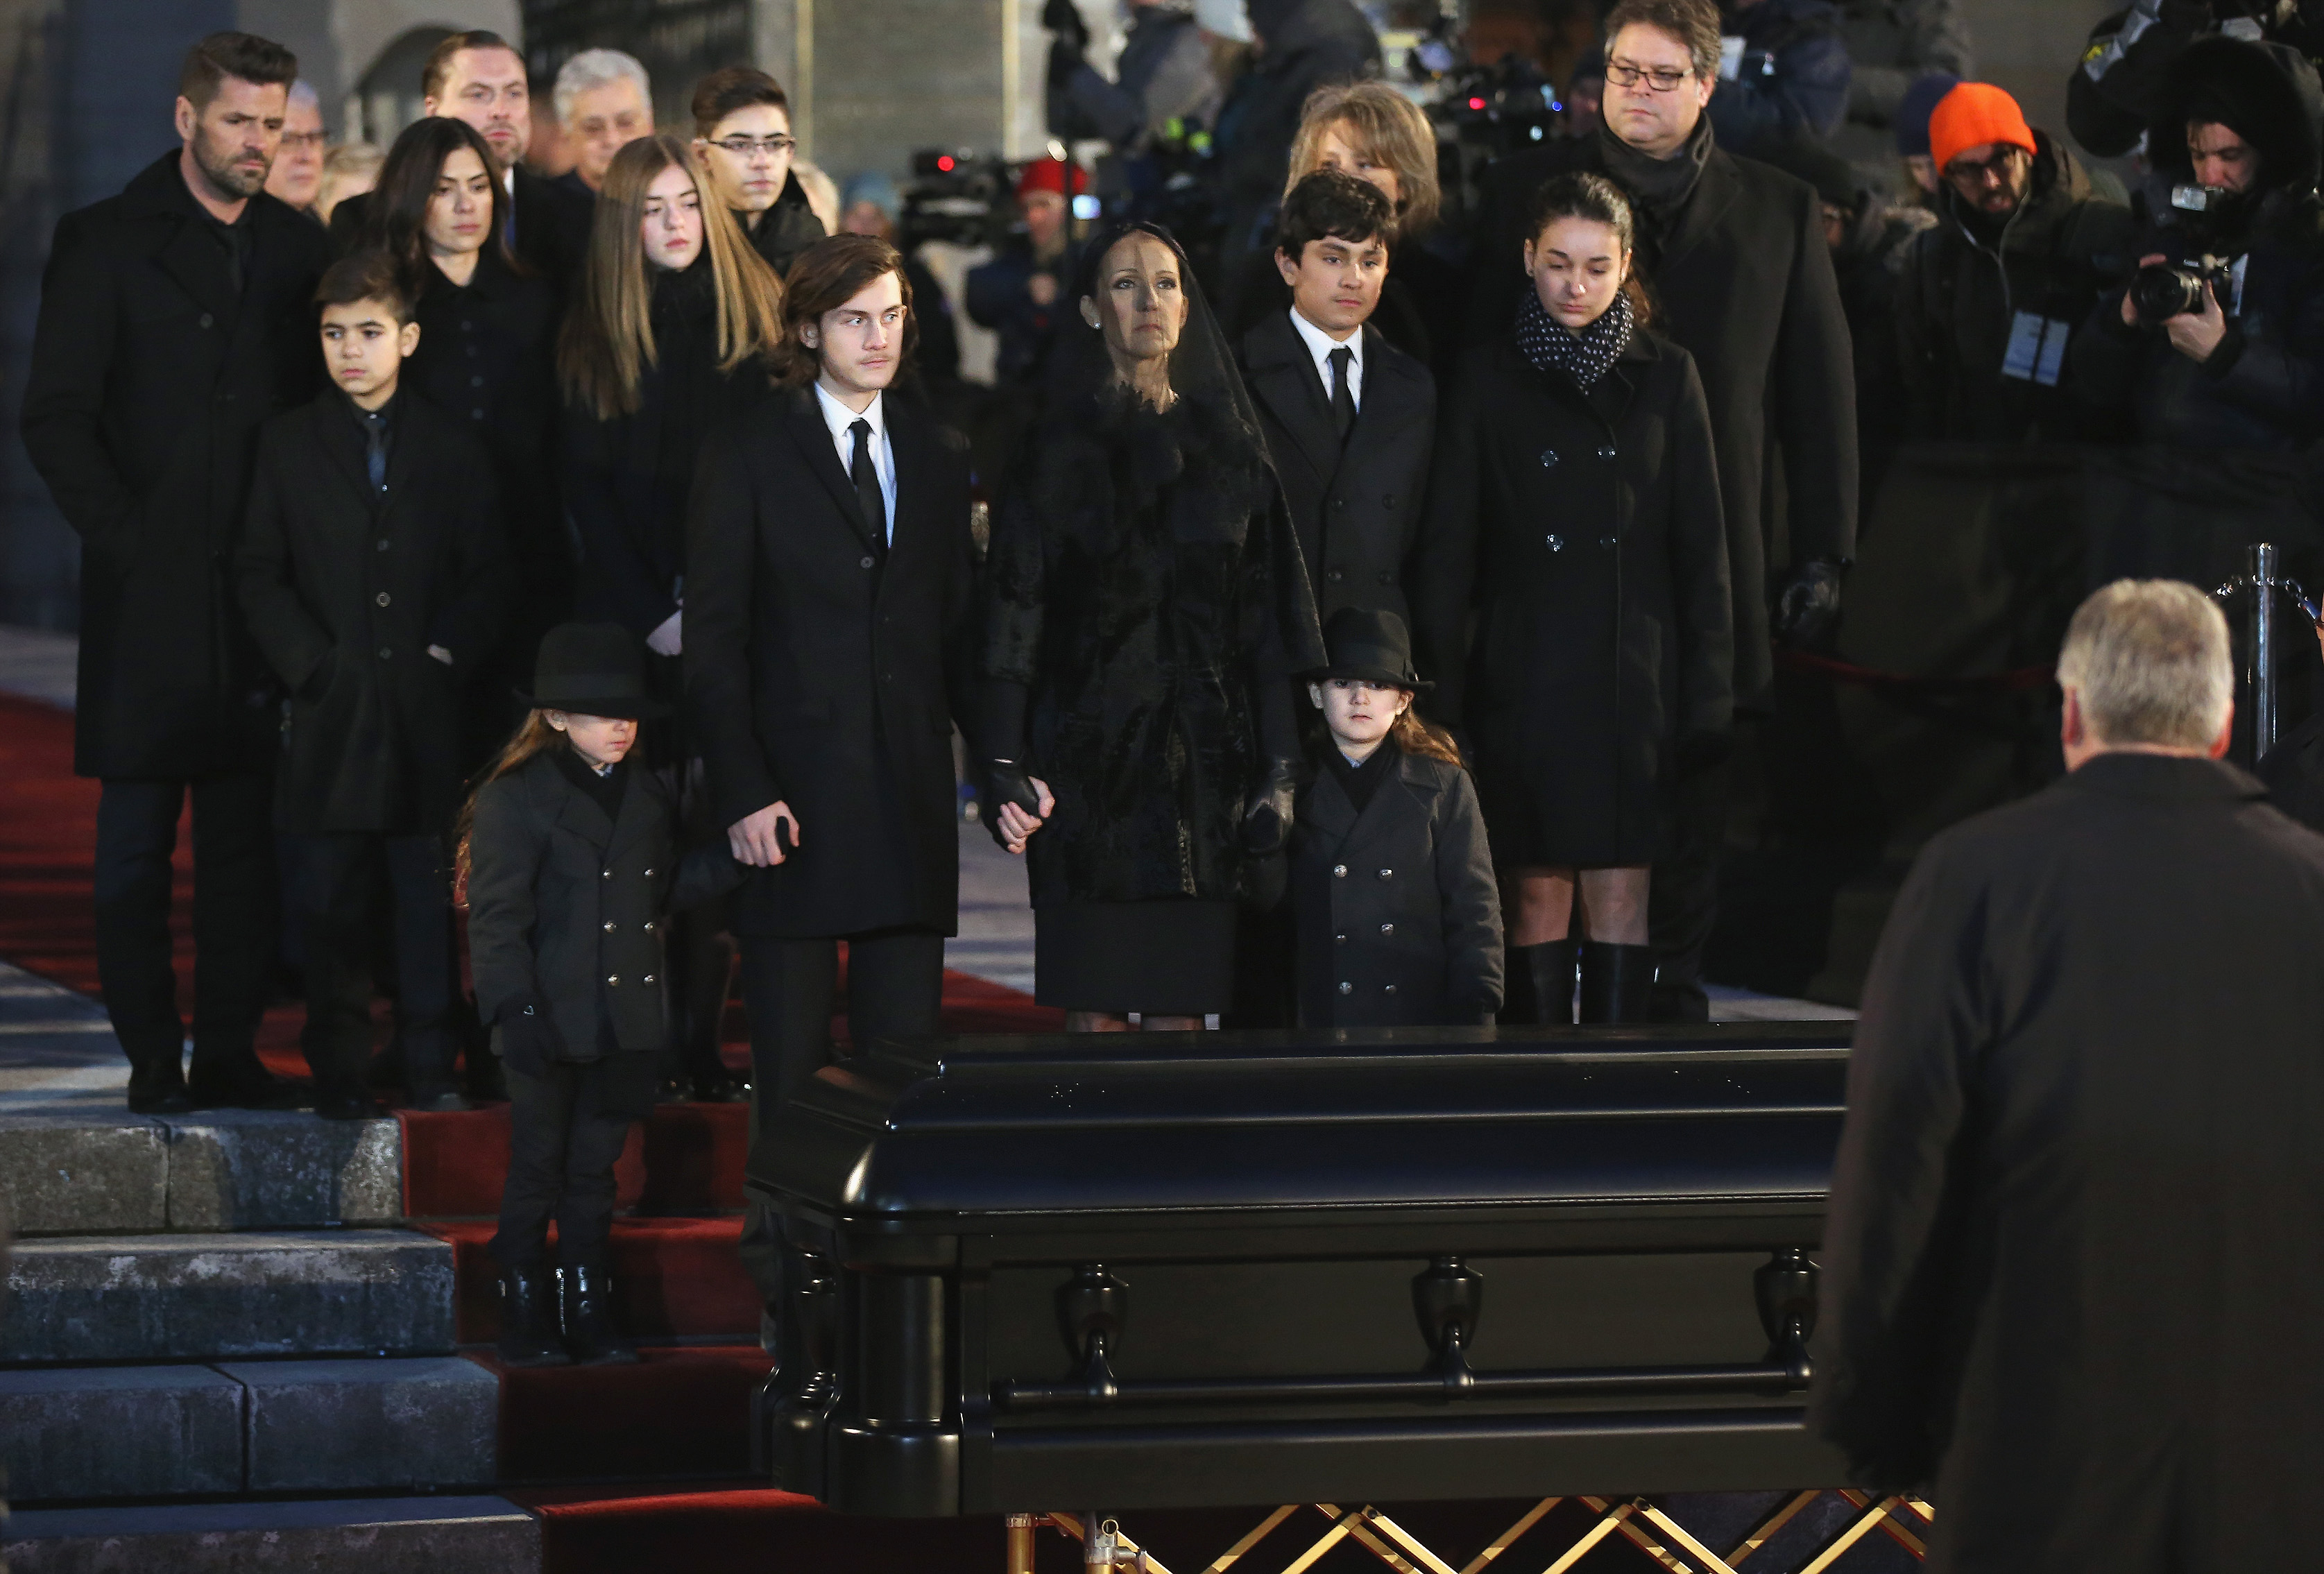 Celine Dion and children Rene-Charles Angelil, Eddy Angelil and Nelson Angelil attend the State Funeral Service for Celine Dion's Husband Rene Angelil at Notre-Dame Basilica on January 22, 2016, in Montreal, Canada | Source: Getty Images